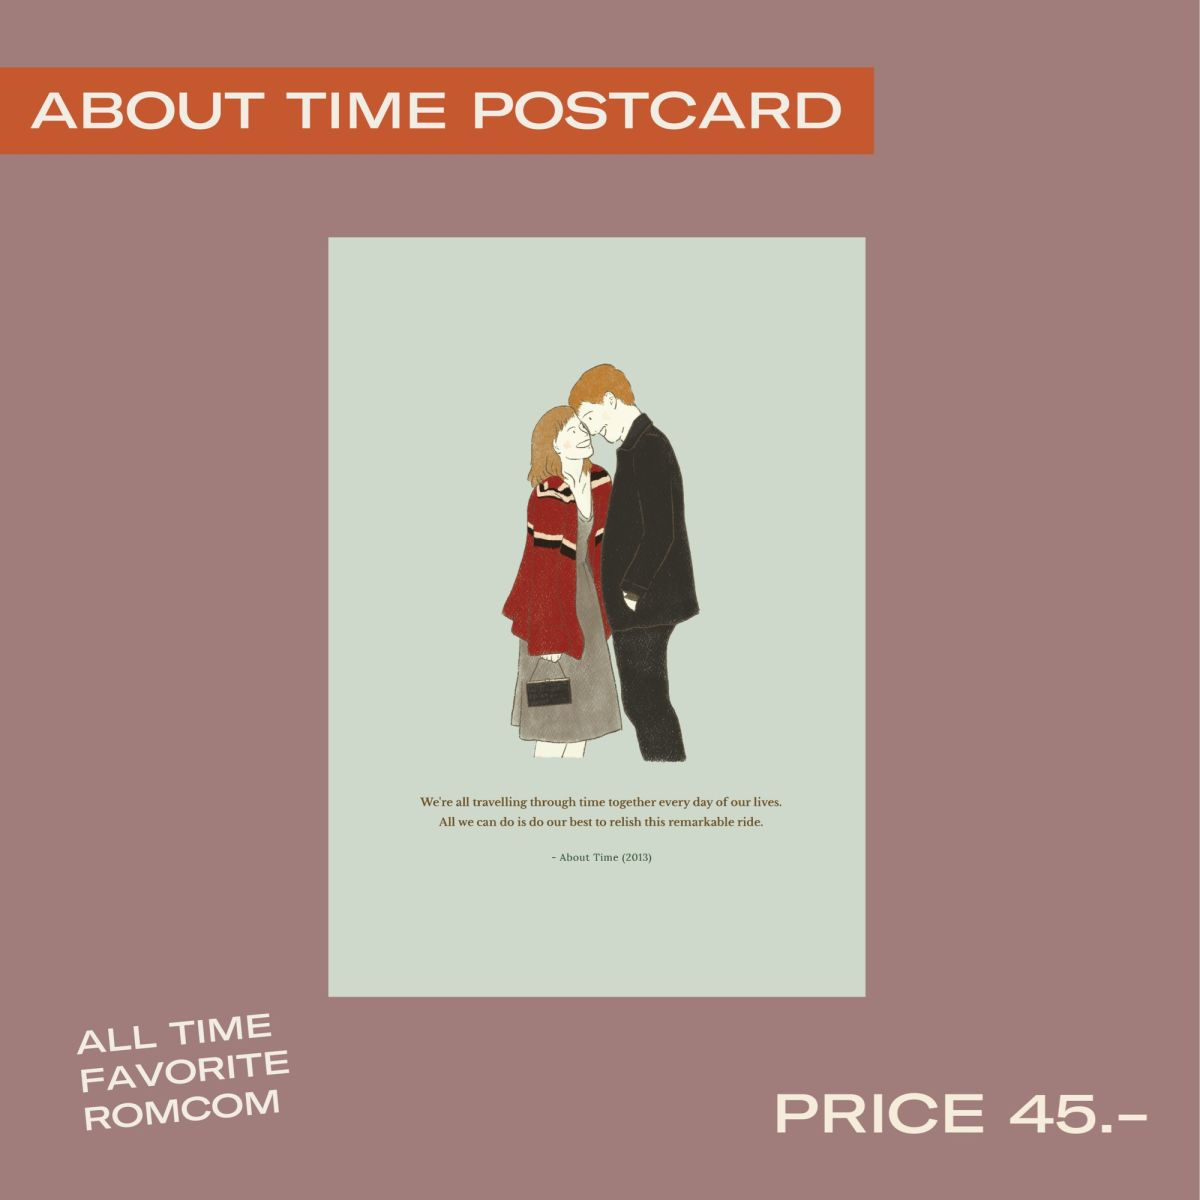 About Time Postcard